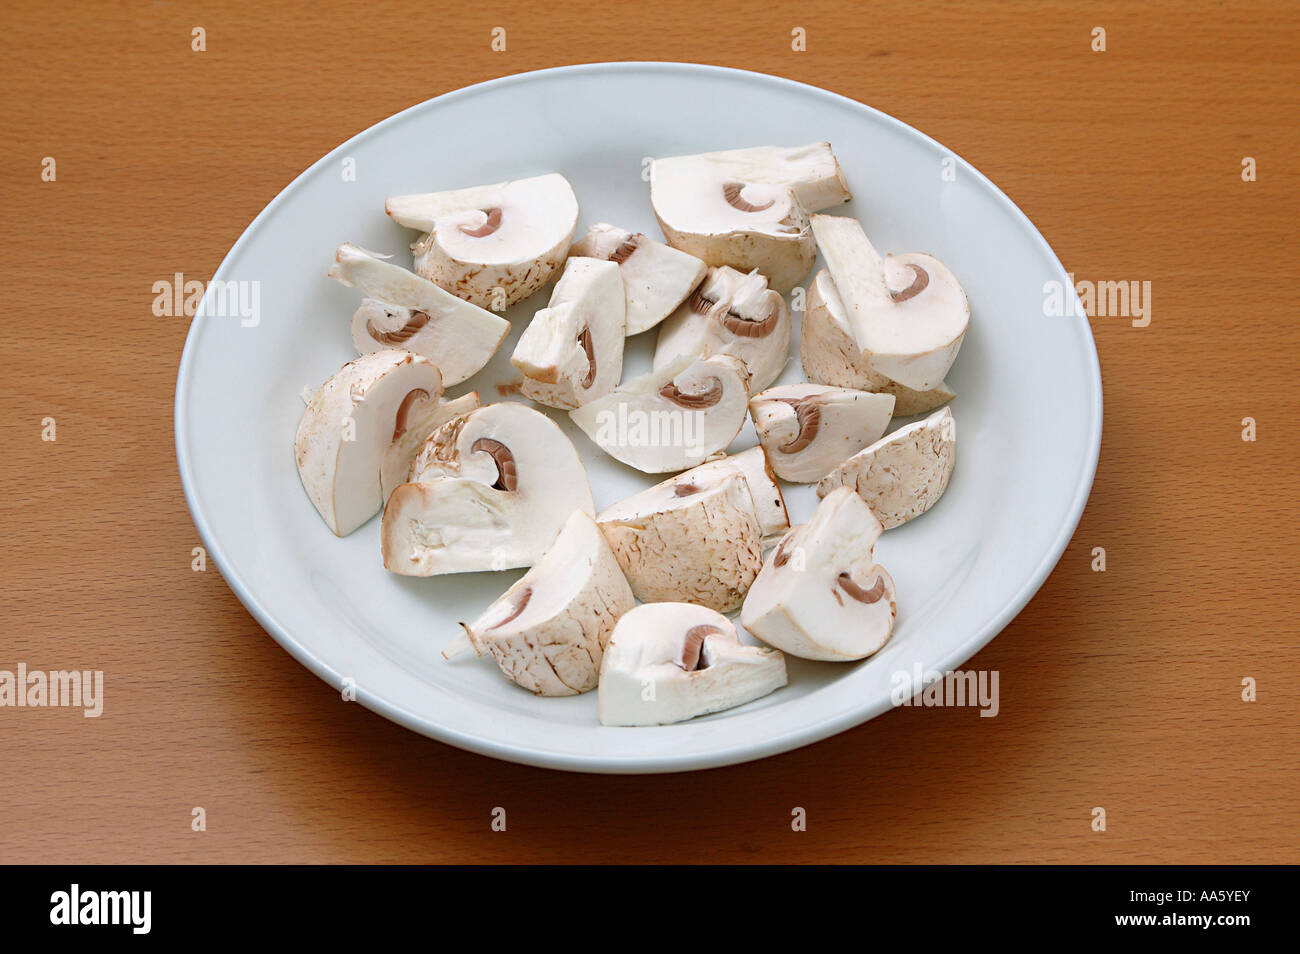 ANG103756 Vegetable white button mushroom shape chopped mushroom in the plate Stock Photo